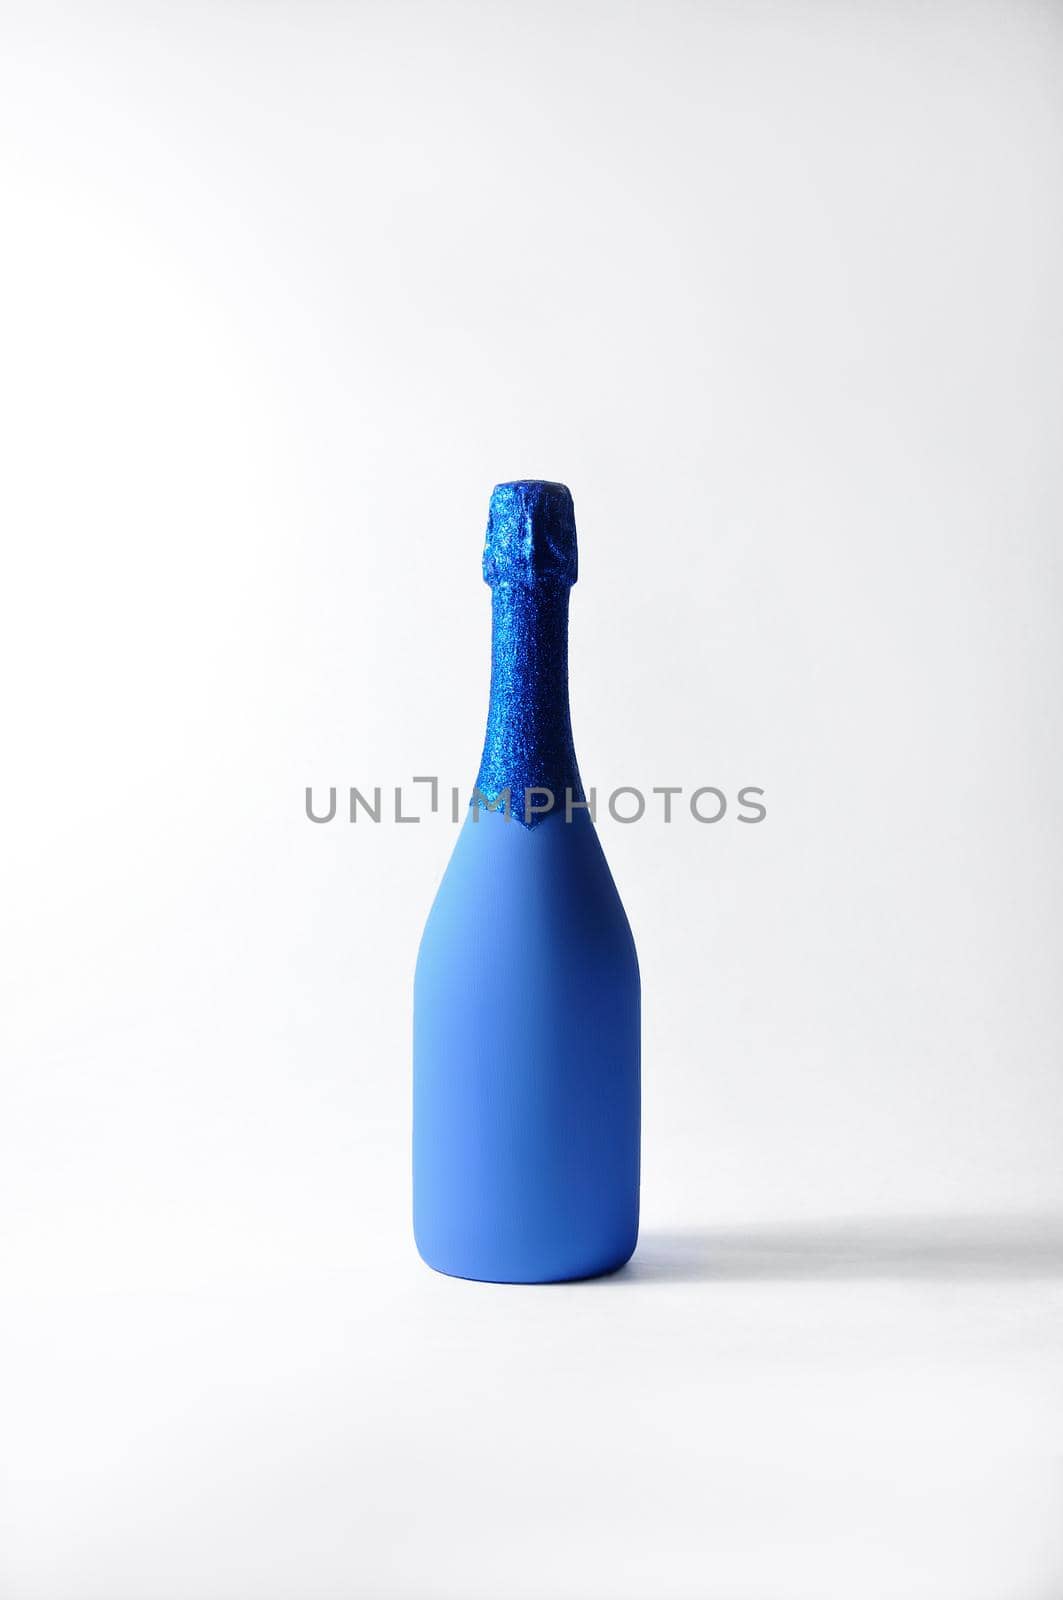 Festive Minimalistic Champagne Bottle on Light Background. Creative Concept. Classic Blue - Color of the year 2020.